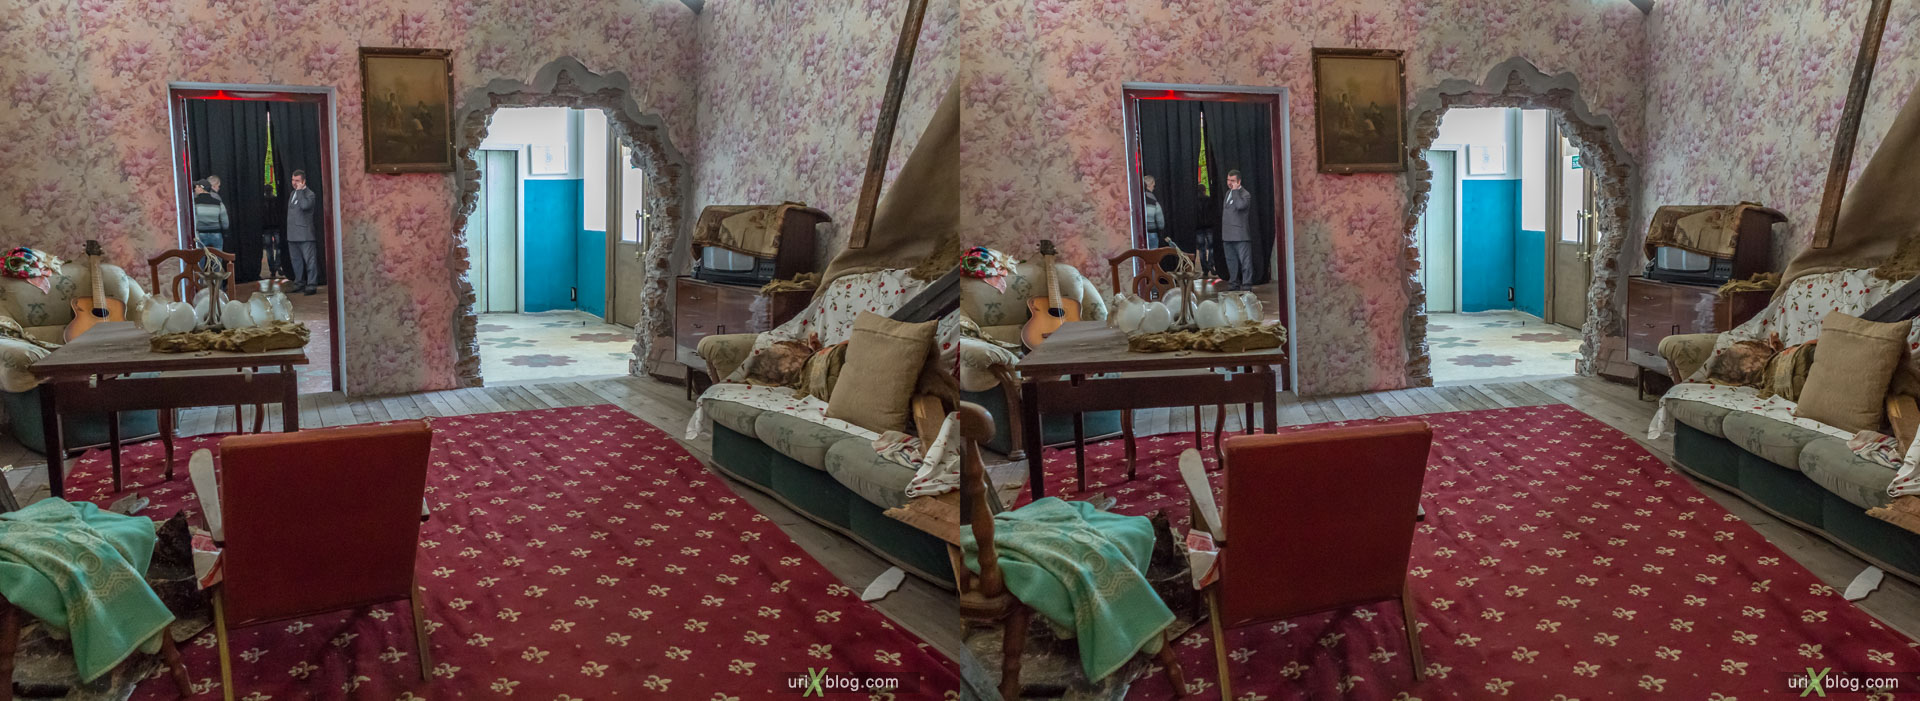 Material evidence, Physical evidence, real evidenca, exhibition, VDNKh, VVTs, Donbass, DNR, LNR, Ukraine, Moscow, Russia, 3D, stereo pair, cross-eyed, crossview, cross view stereo pair, stereoscopic, 2015